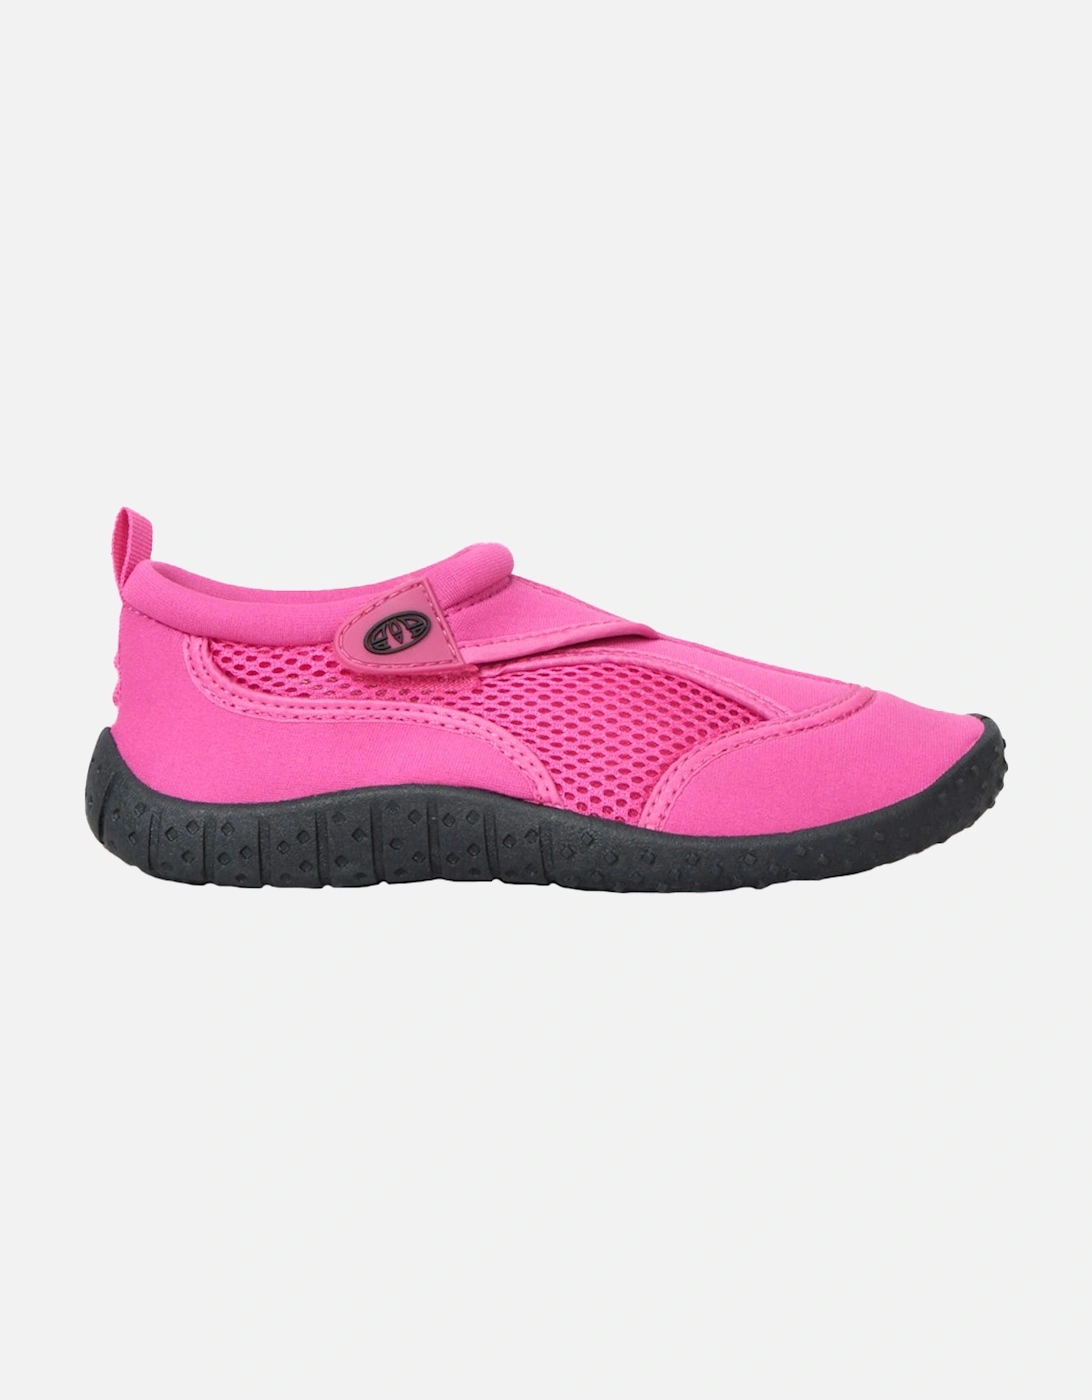 Childrens/Kids Paddle Water Shoes